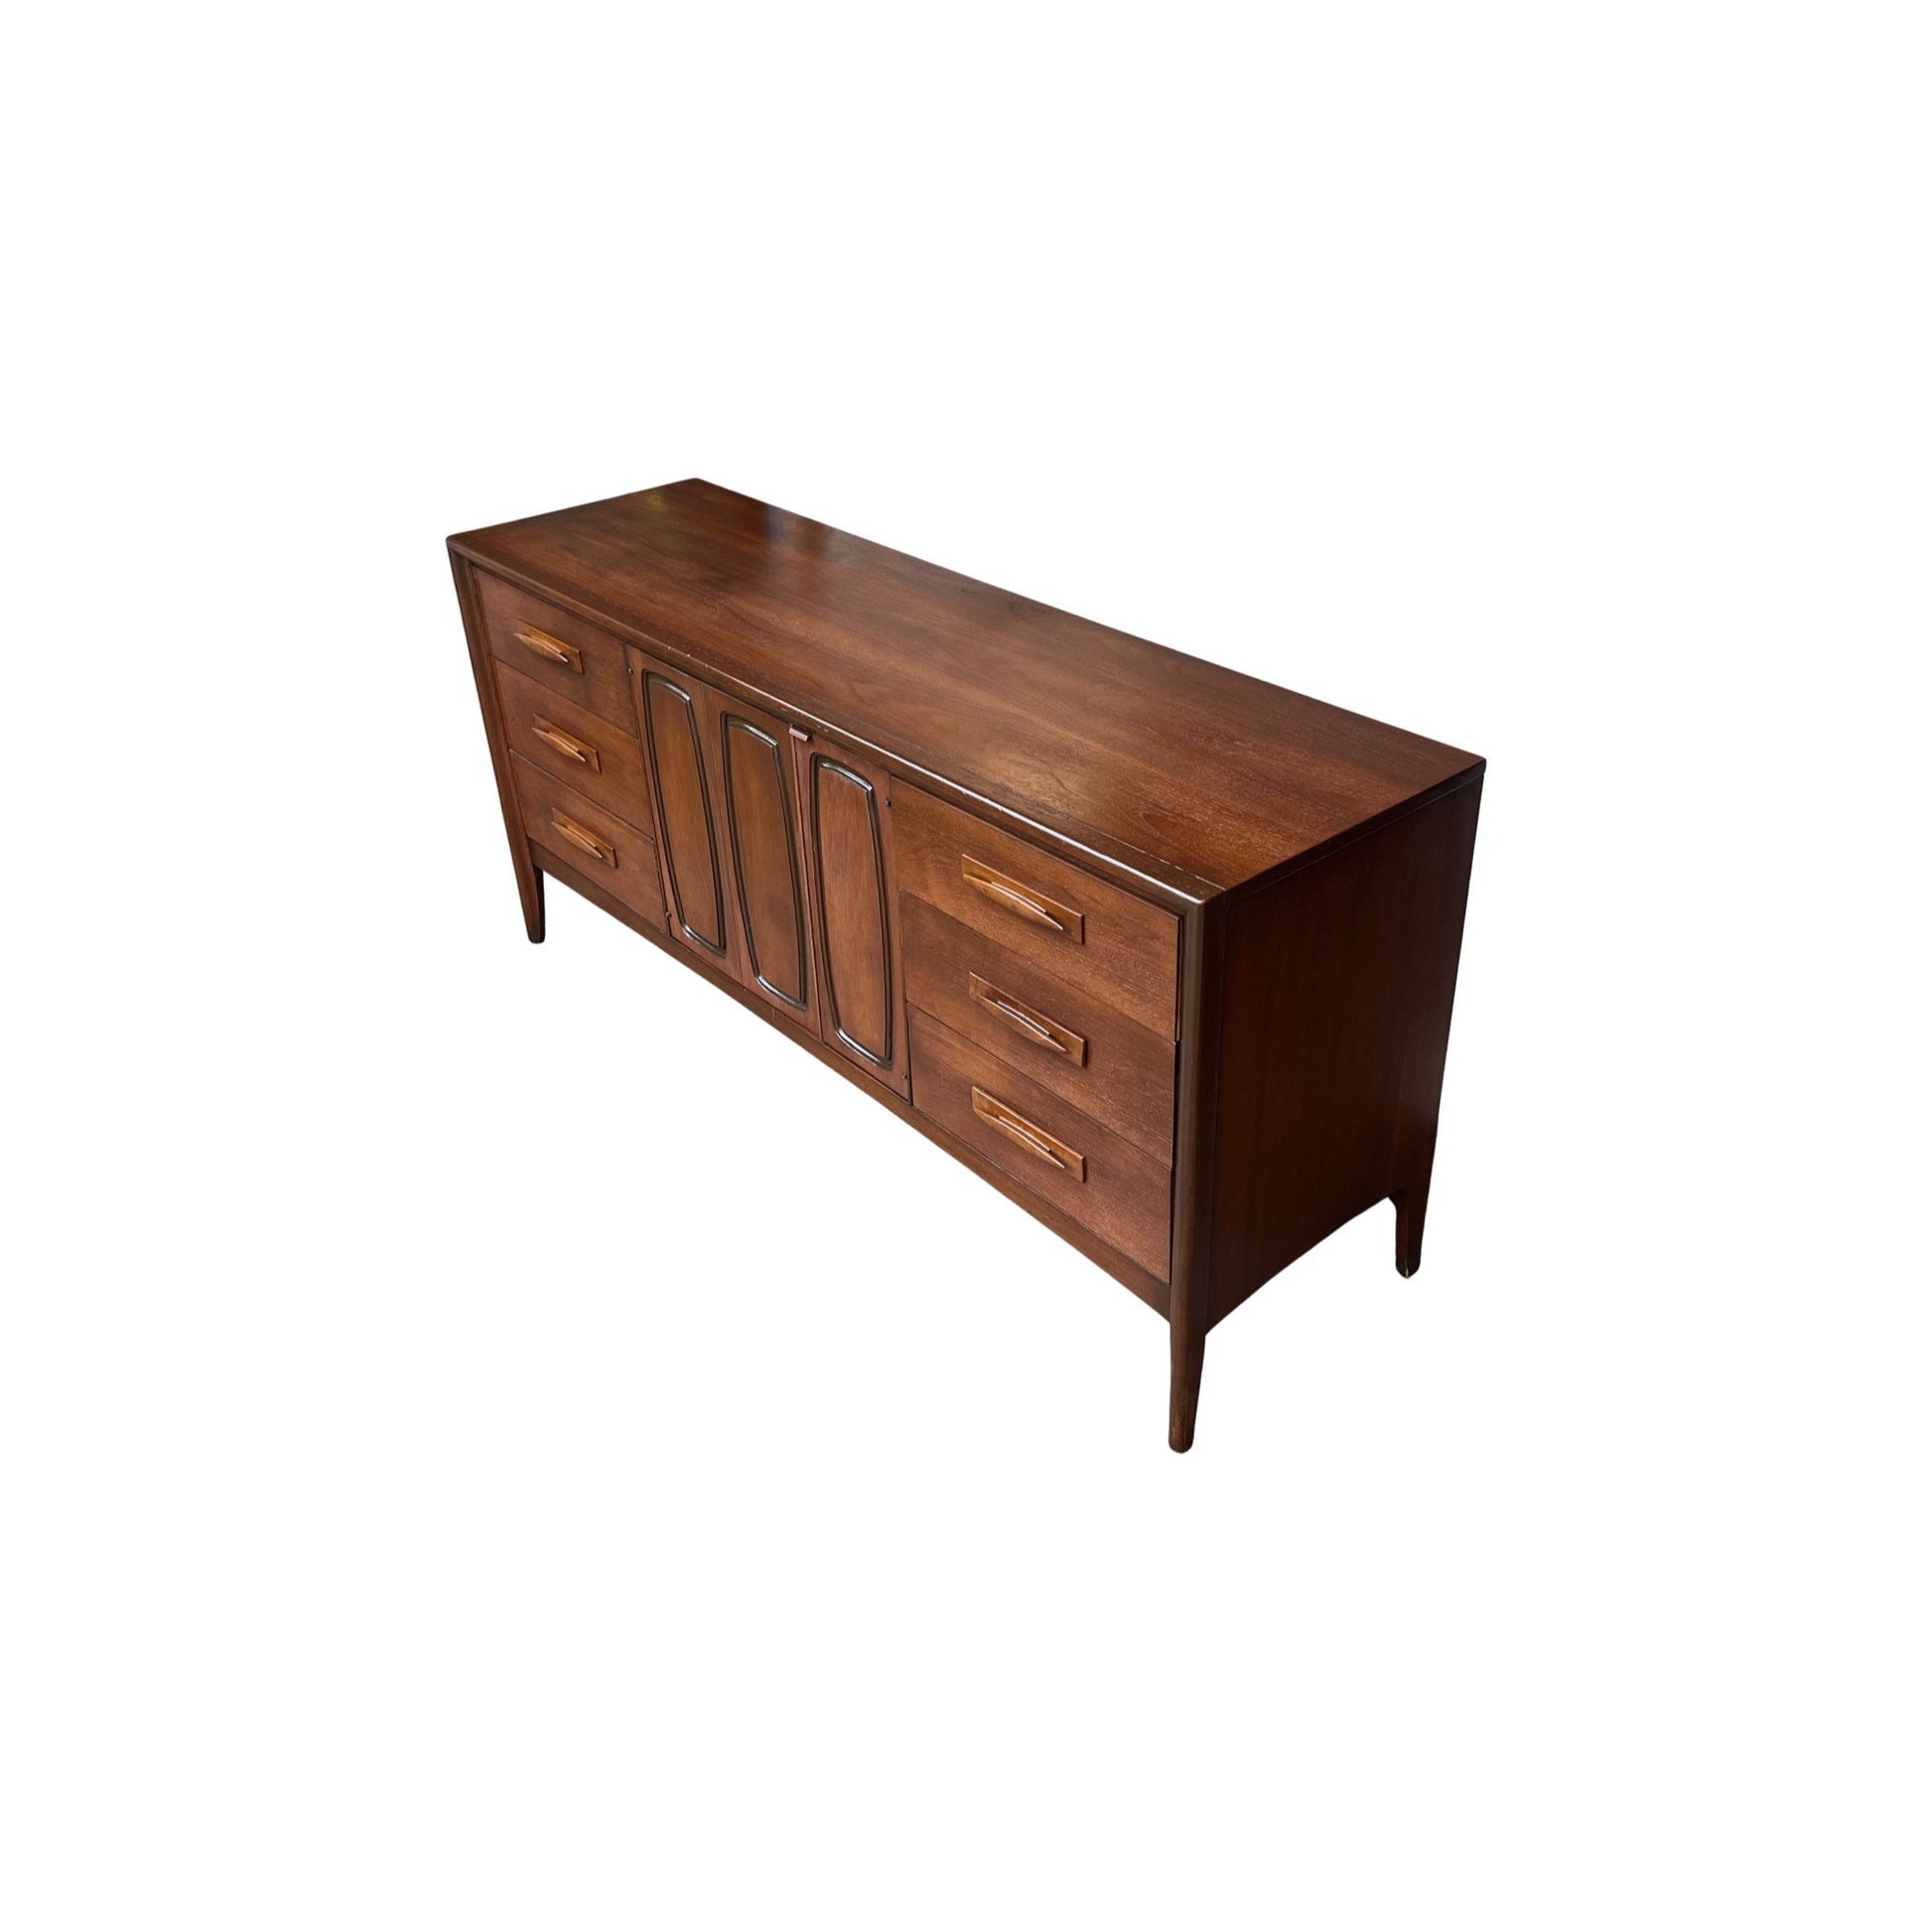 Desirable Mid-Century Modern Features and beautiful wood grains - Broyhill Emphasis Credenza